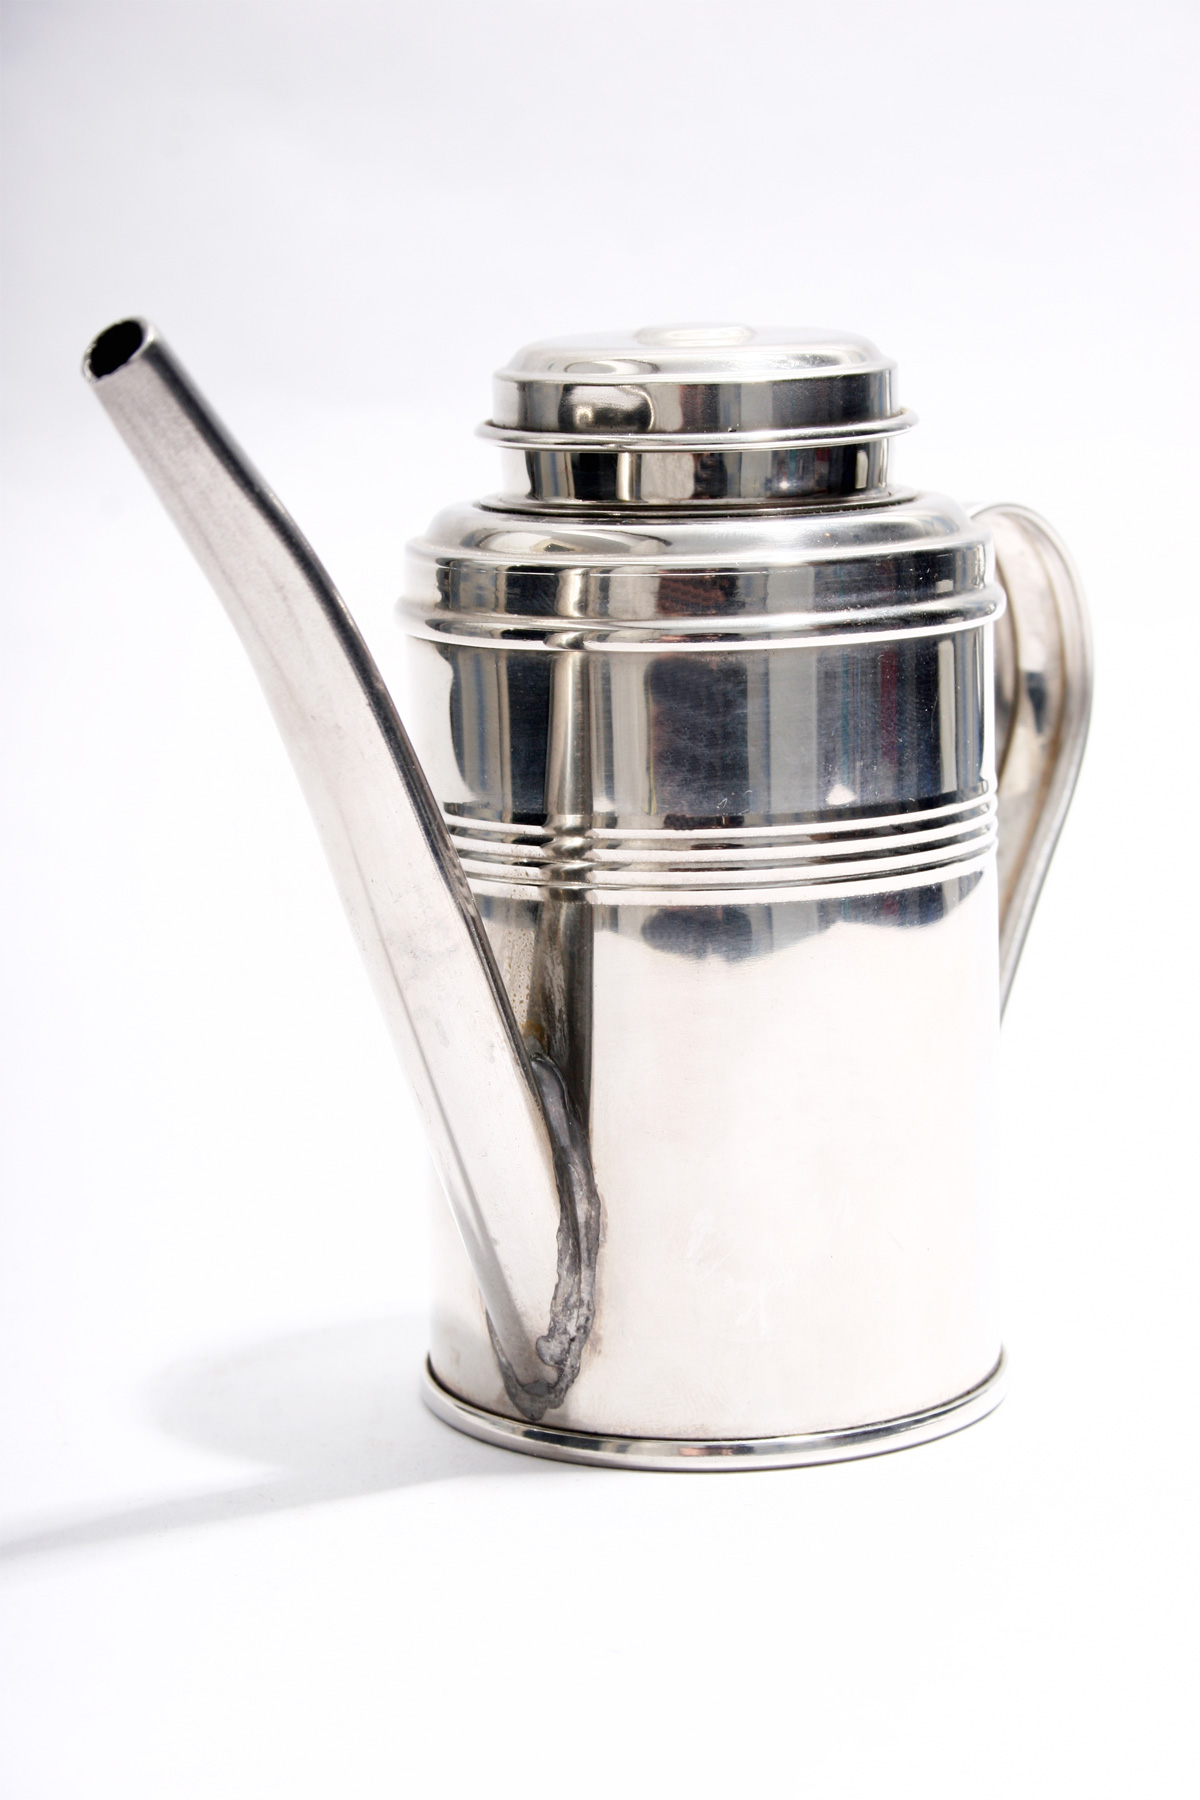 Stainless steel teapot on white background